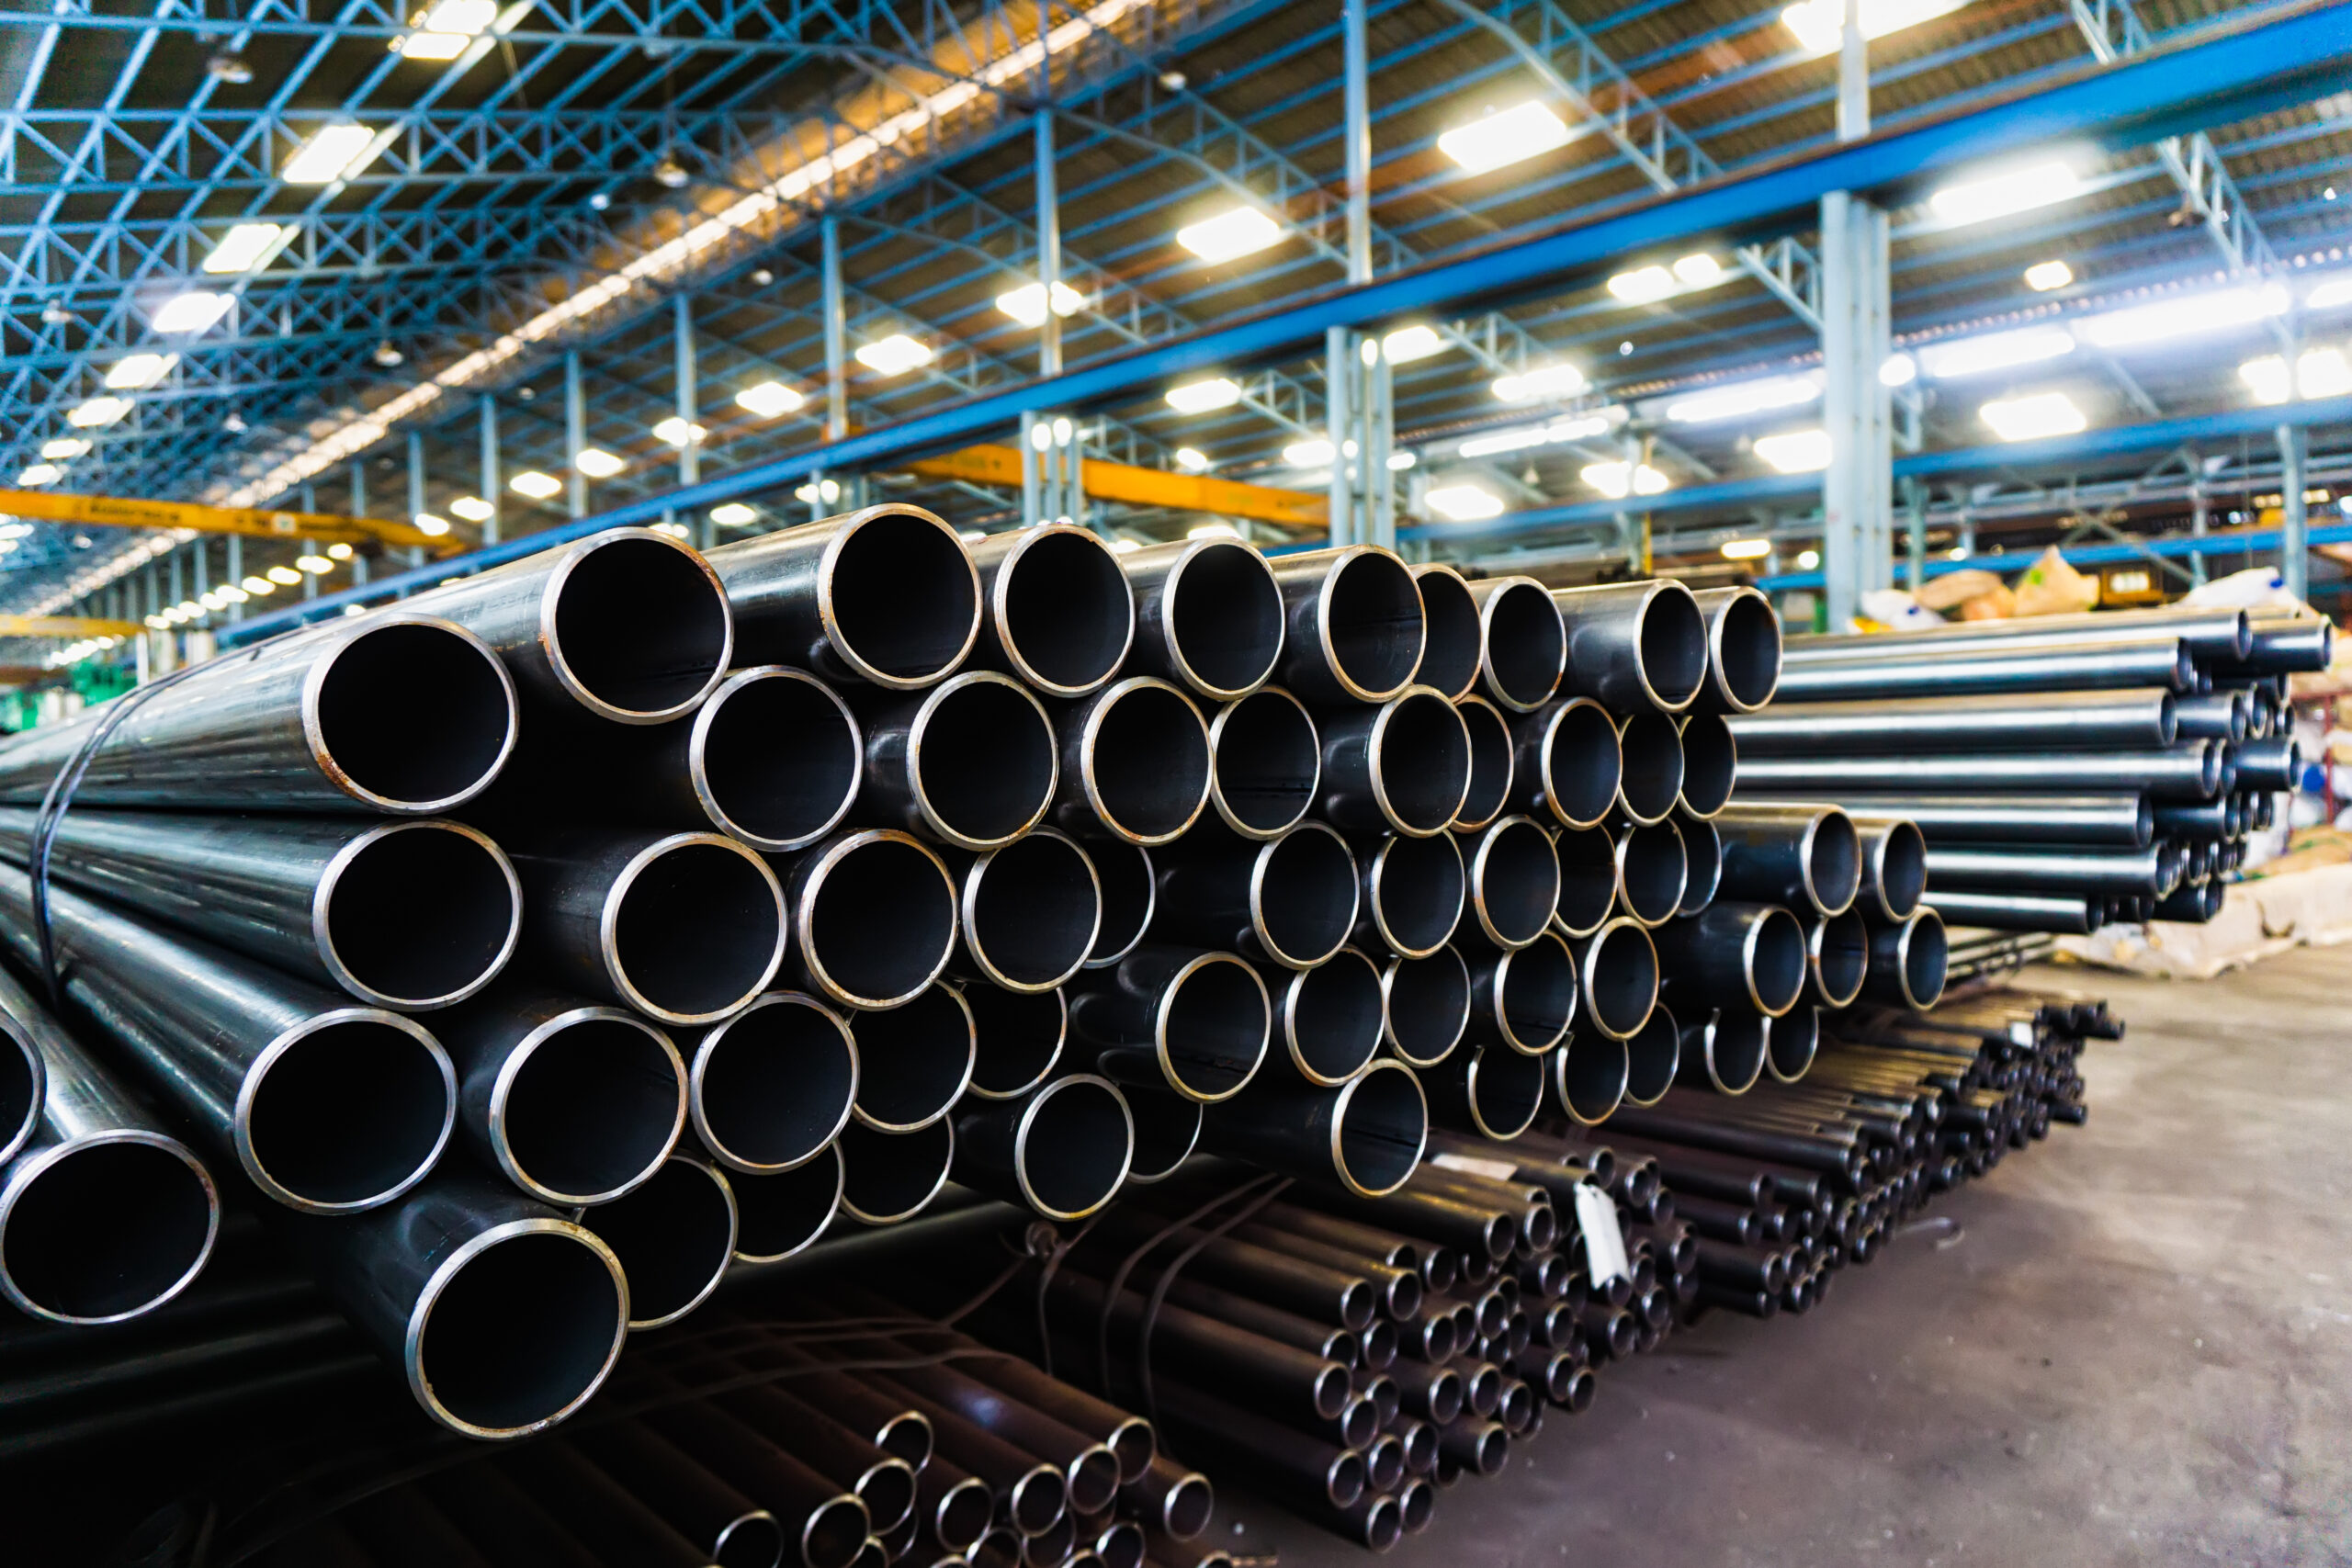 High,Quality,Galvanized,Steel,Pipe,Or,Aluminum,And,Chrome,Stainless